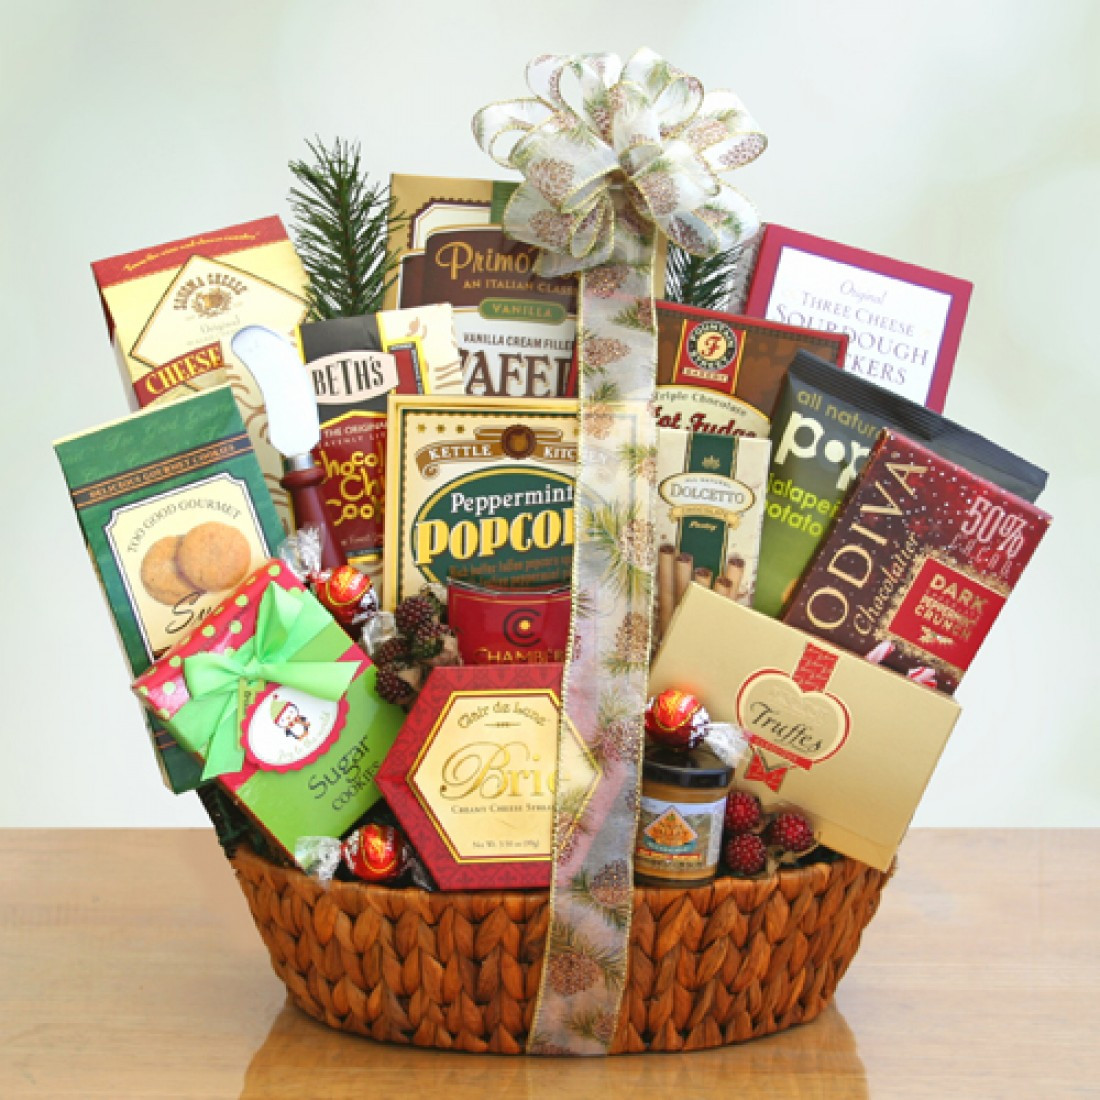 Christmas Gift Baskets Free Shipping
 Start the Holiday Gift Baskets